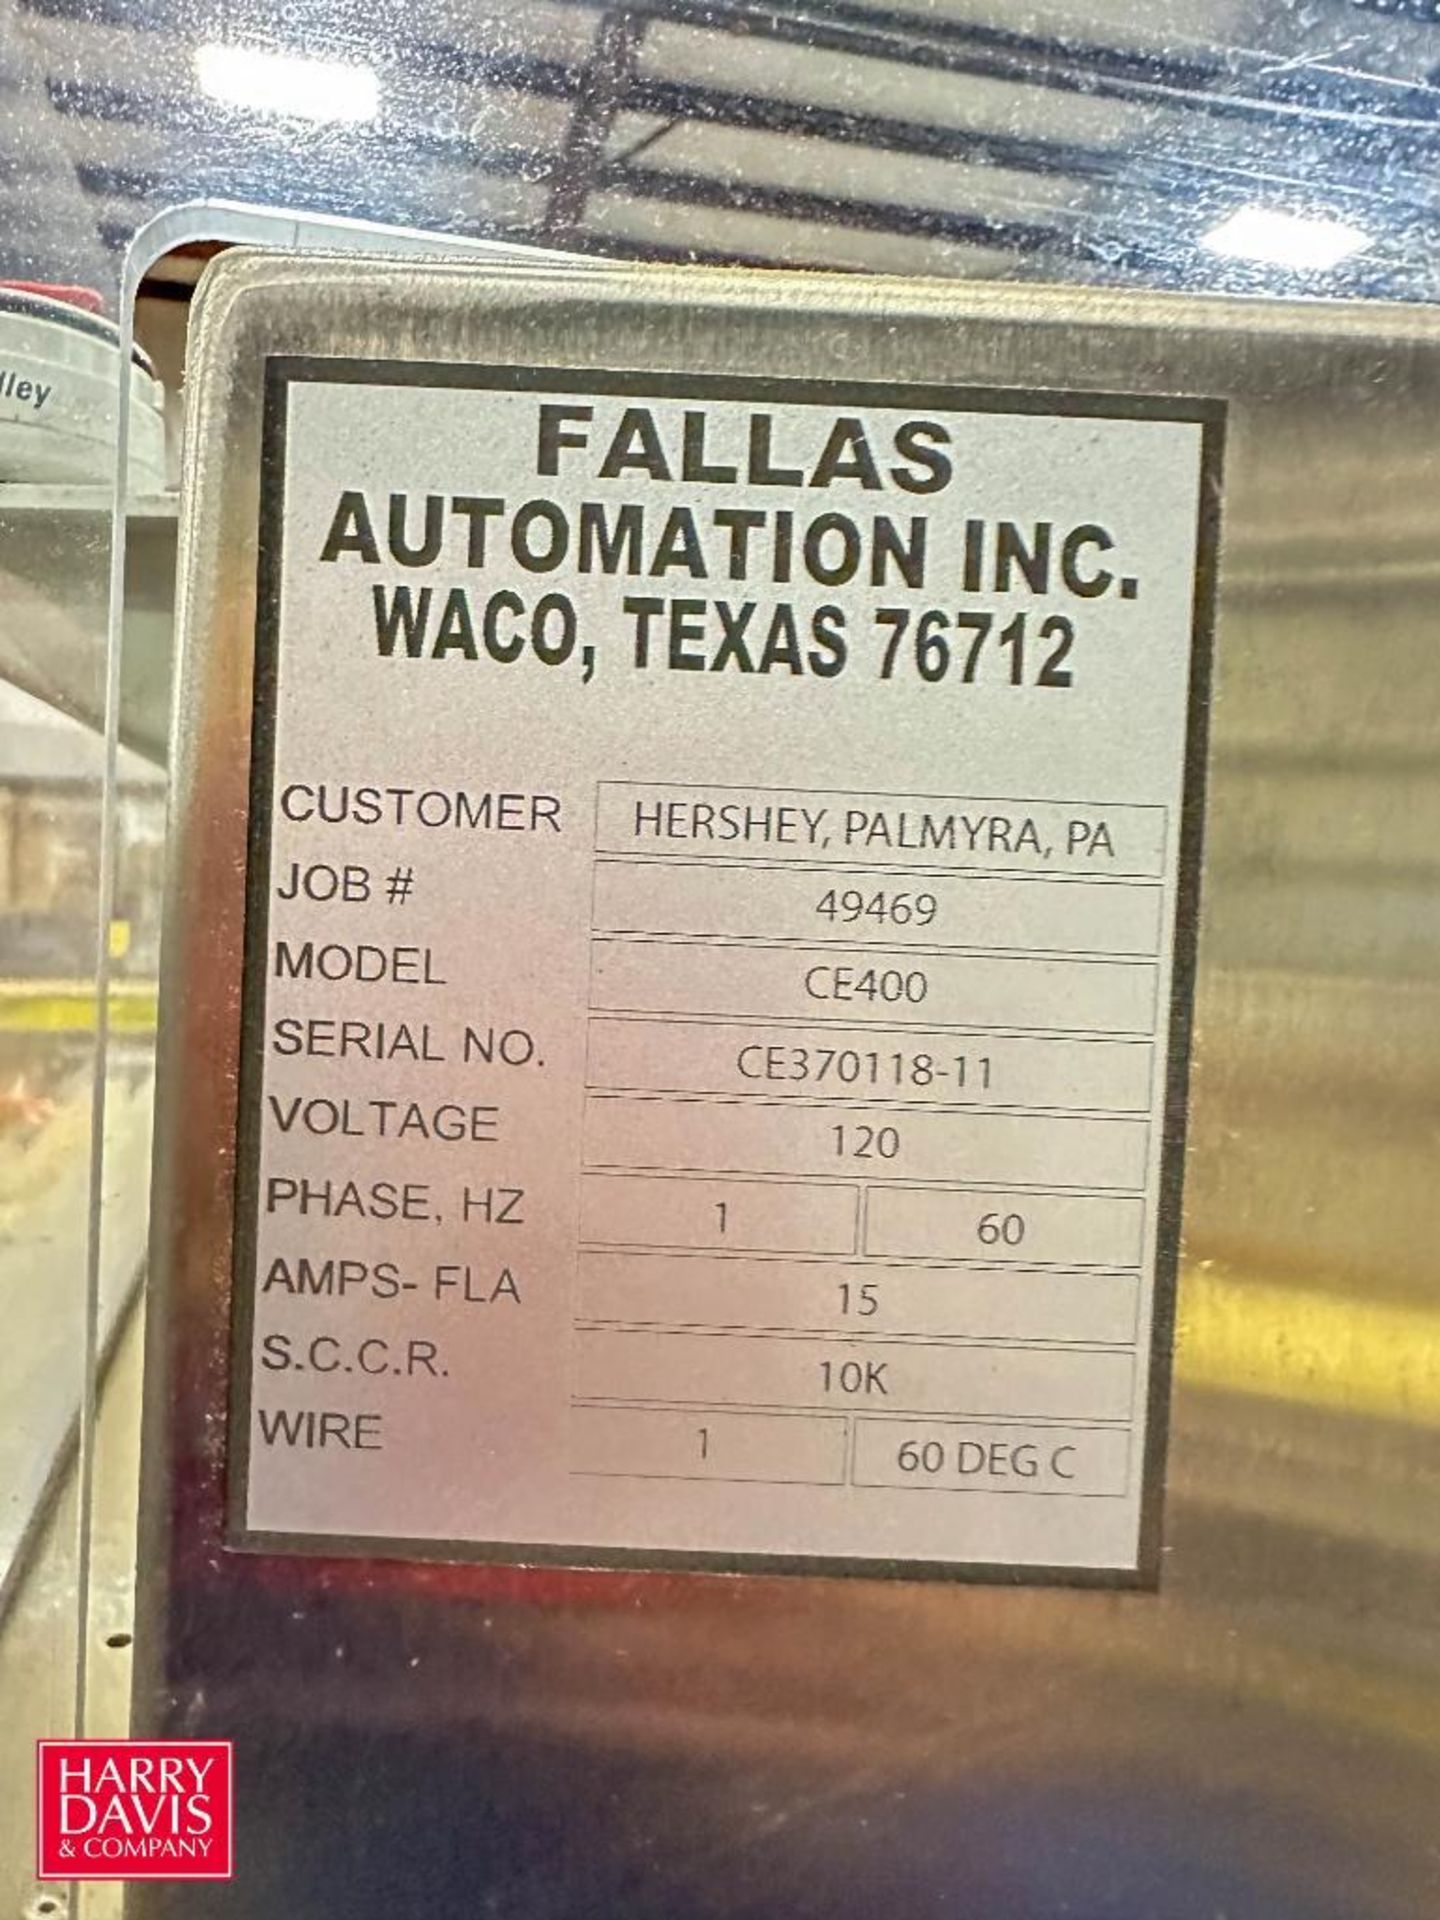 FALLAS S/S Case Erector, Model: CE400, S/N: CE370118-11 with Allen-Bradley MicroLogix PLC and - Image 4 of 4